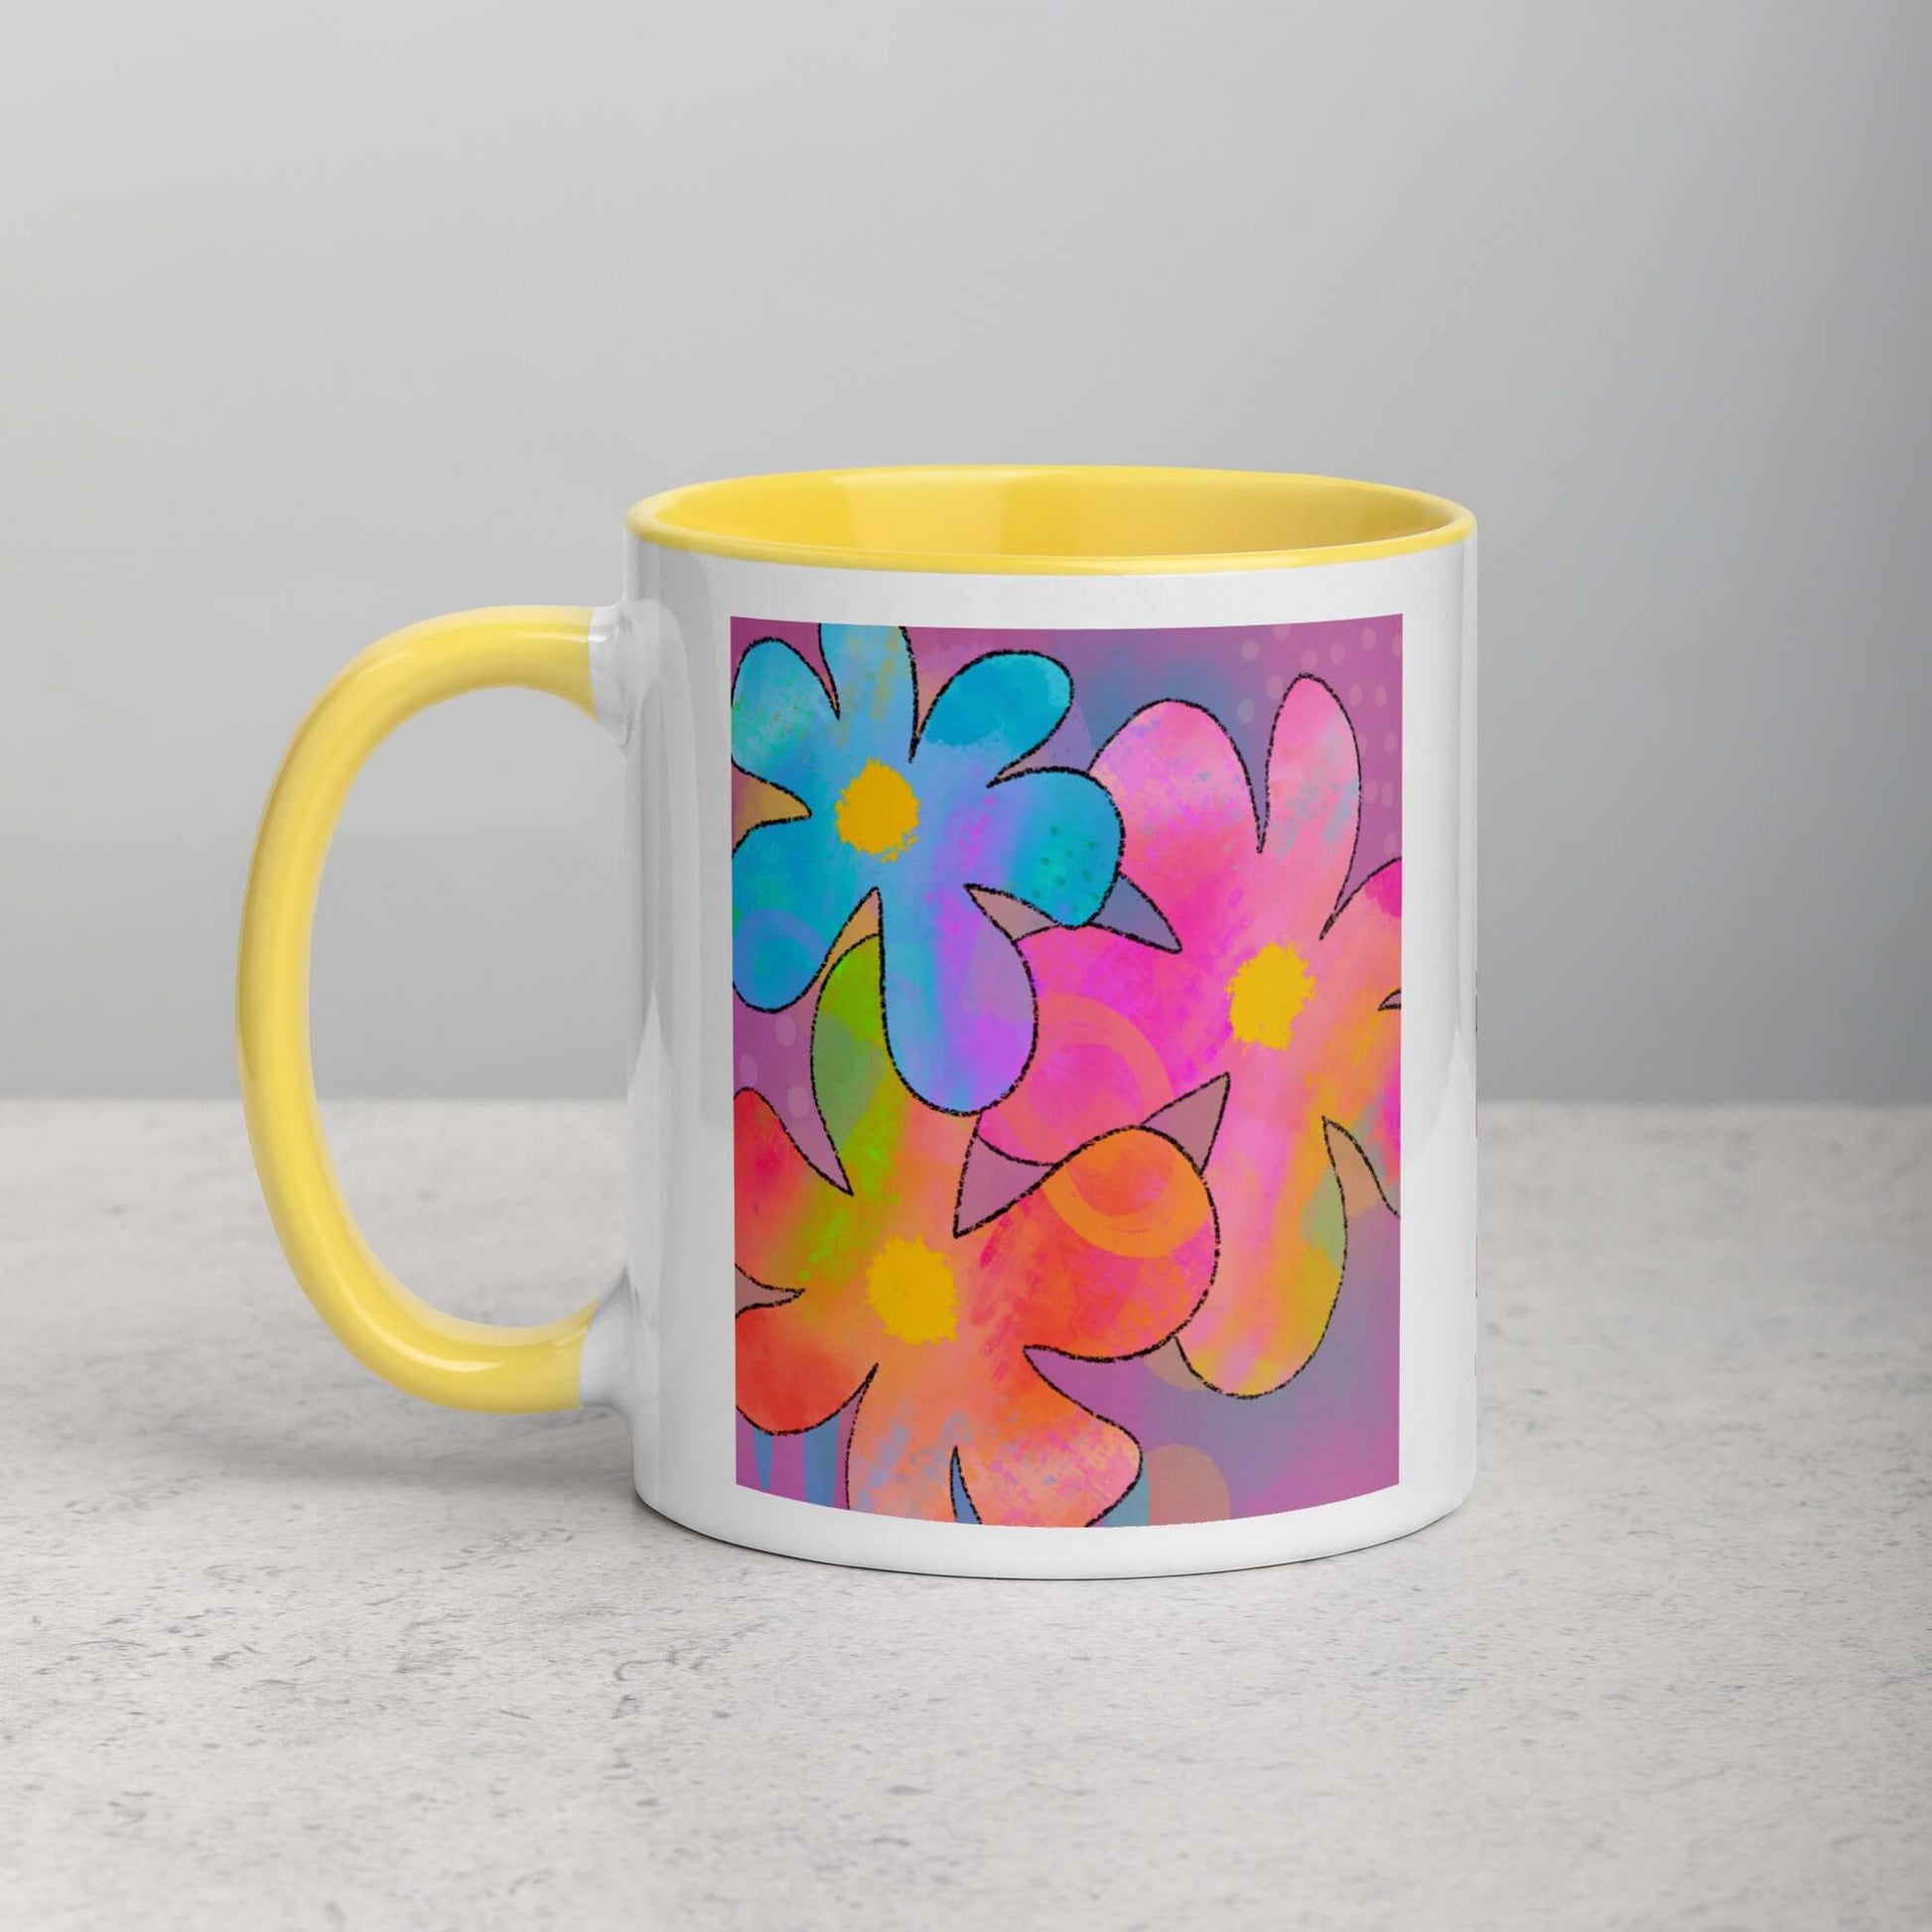 Big Colorful 1960s Psychedelic “Hippie Flowers” Mug with Bright Yellow Color Inside Left Handed Front View